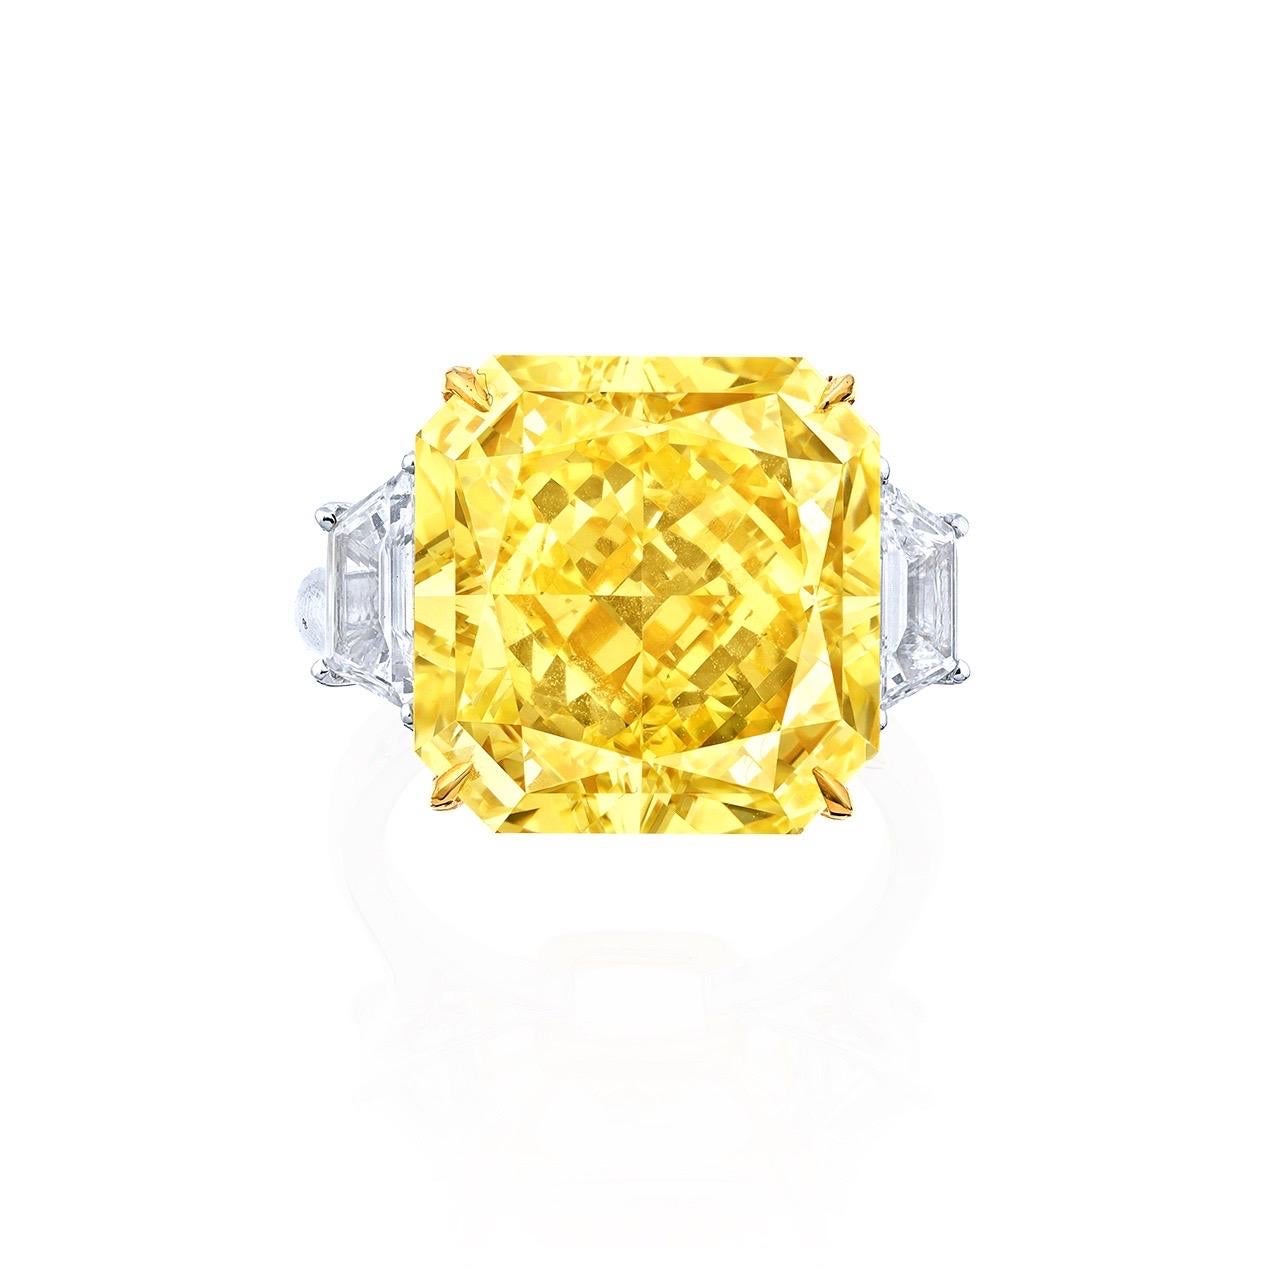 Main stone: 18.00 carat Fancy Intense Yellow, VS2, Cut-Cornered Square

From Emilio Jewelry, a well known and respected wholesaler/dealer located on New York’s iconic Fifth Avenue, 

Please inquire for more images, certificates, details, and any